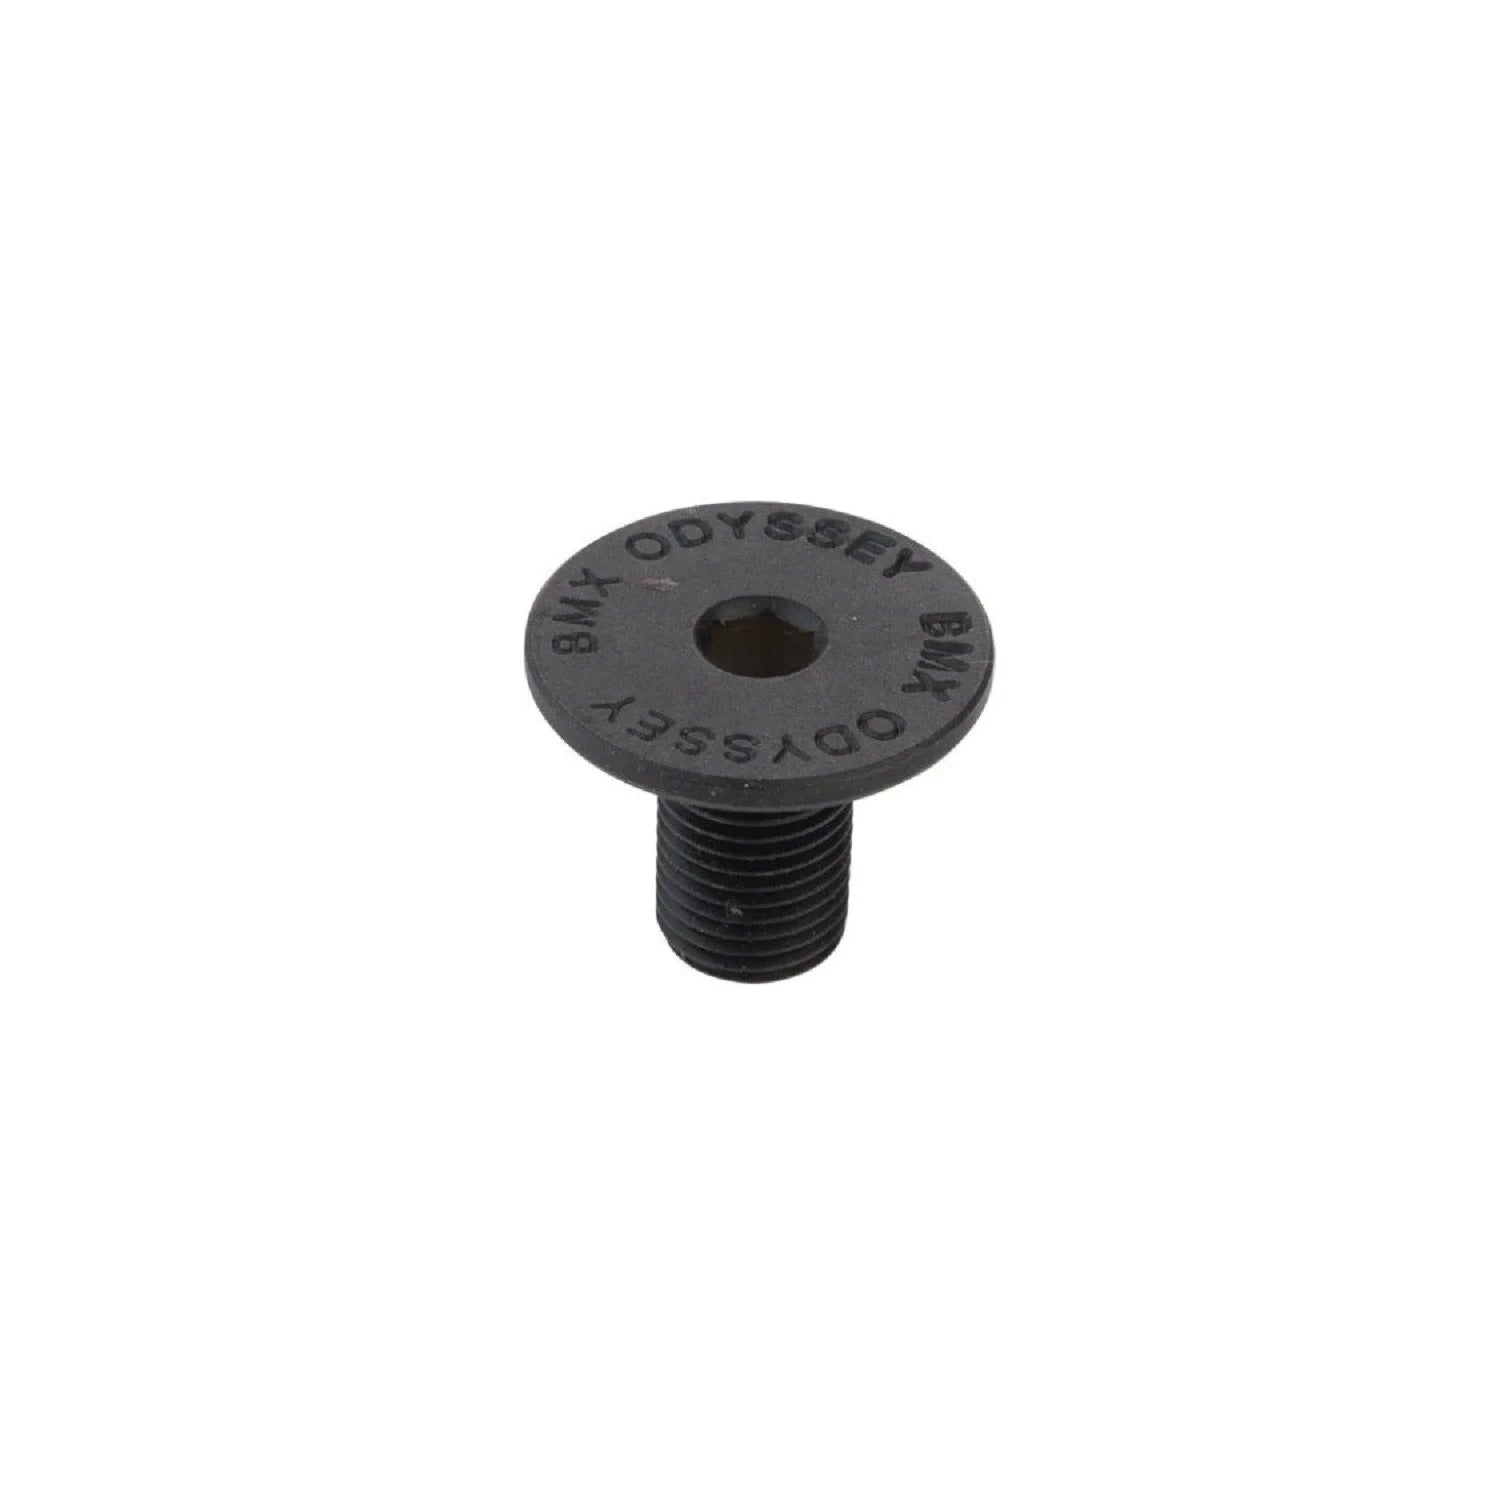 Odyssey Thunderbolt Replacement 6mm Spindle Bolt